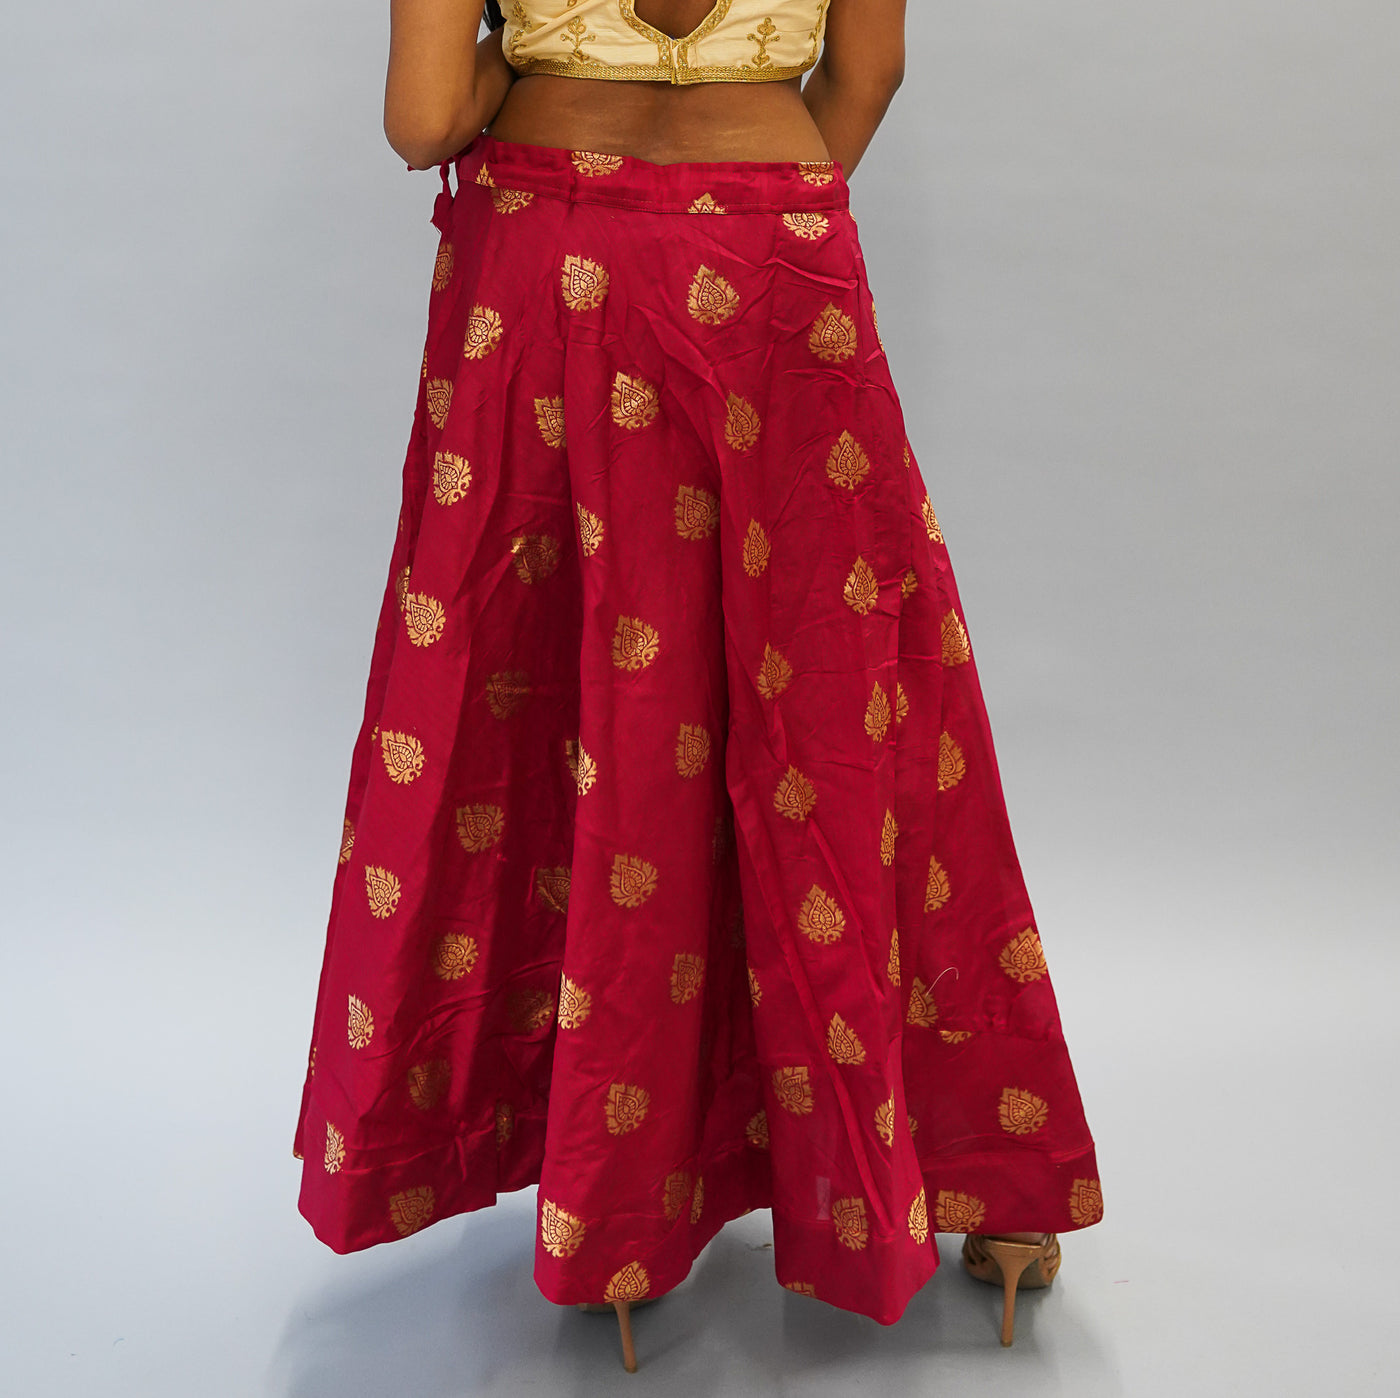 Buy Oat Tan Brocade Skirt With Attached Organza Dupatta And Red Raw Silk  Embroidered Blouse Online - Kalki Fashion